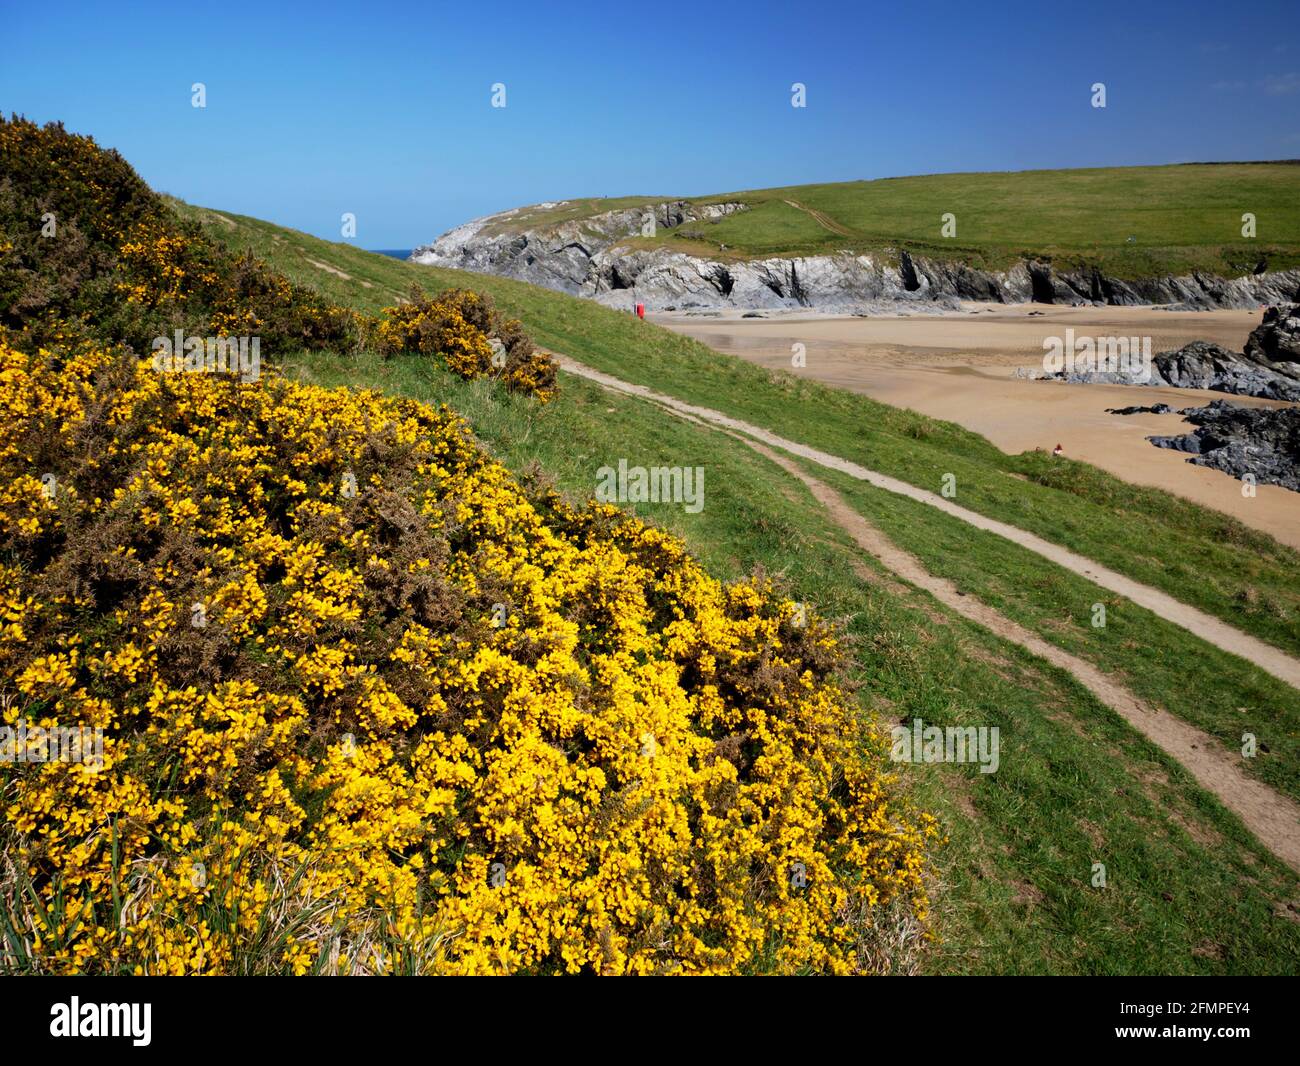 The beach at Porth or Polly Joke, Newquay, Cornwall. Stock Photo